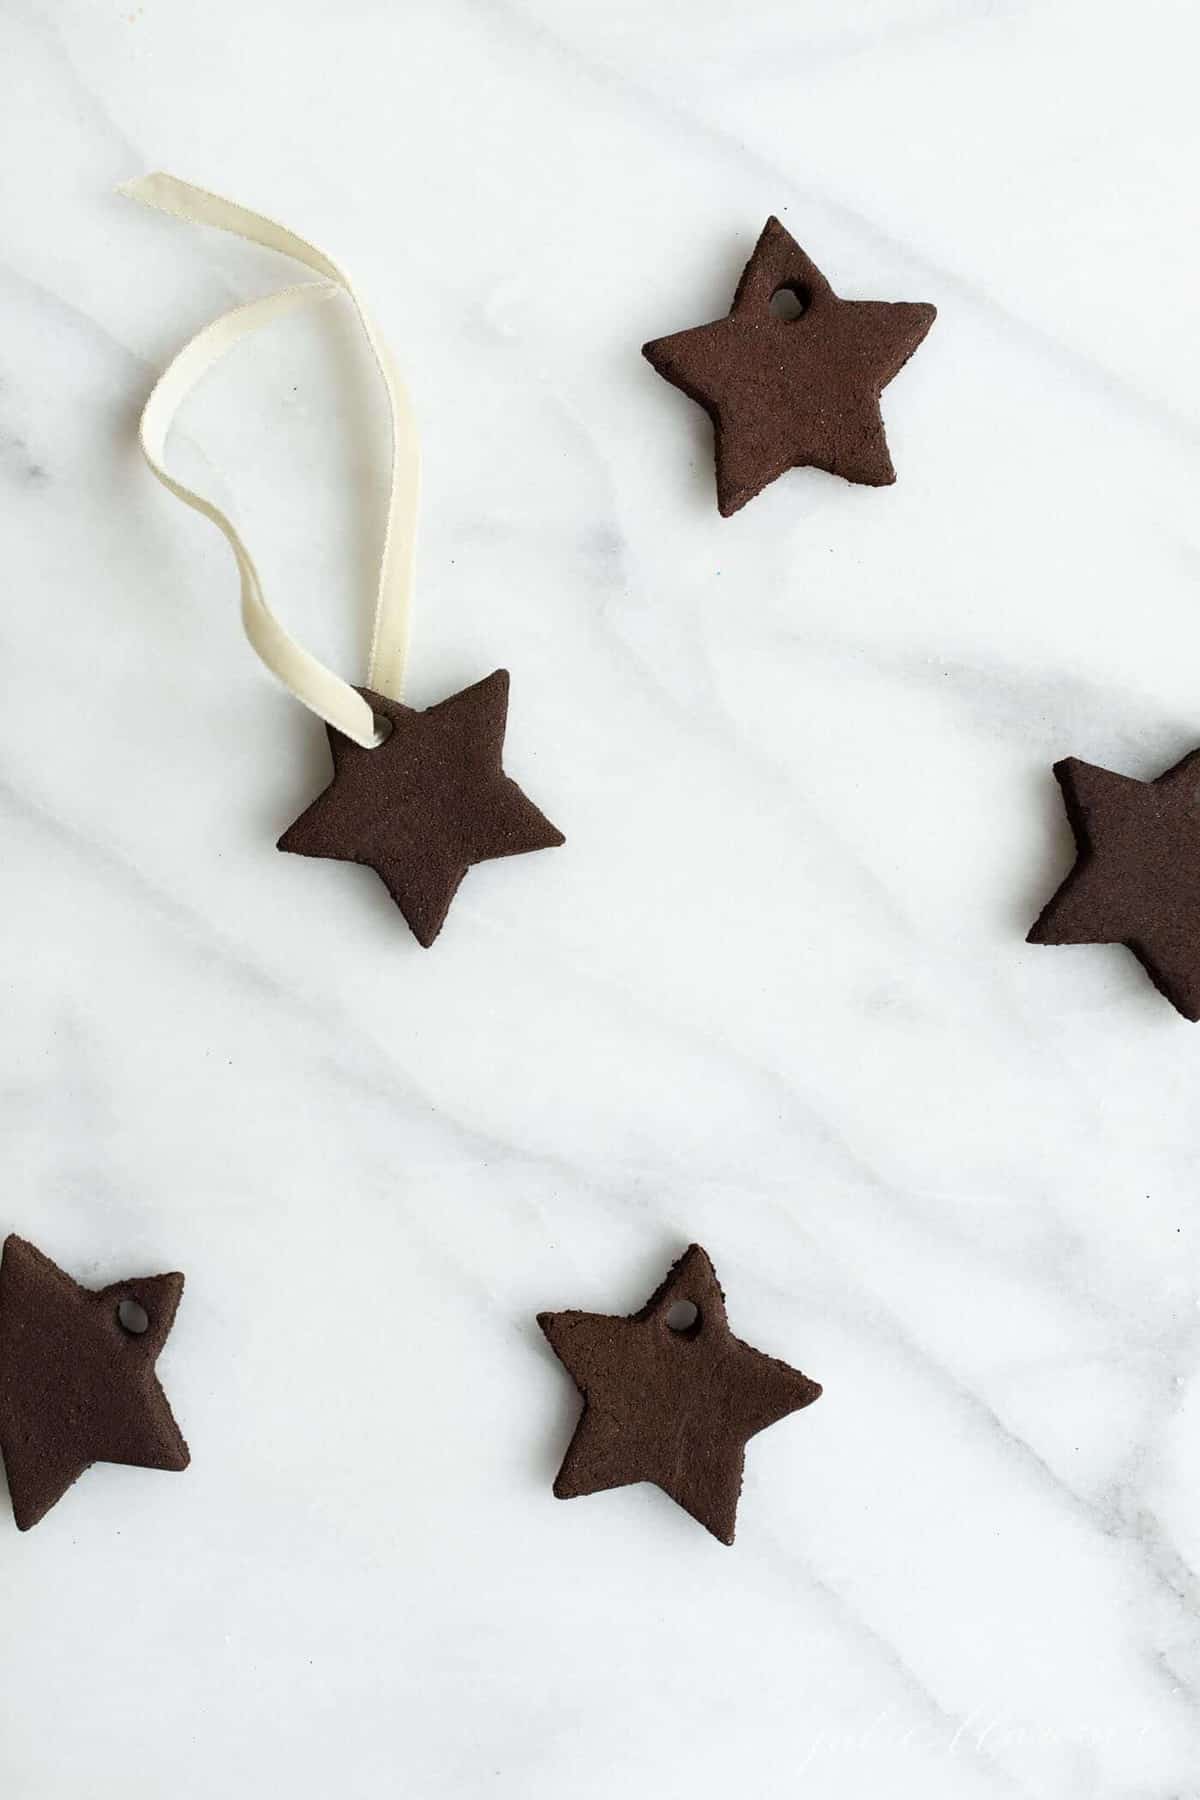 Cinnamon ornaments in the shape of stars on a marble surface.